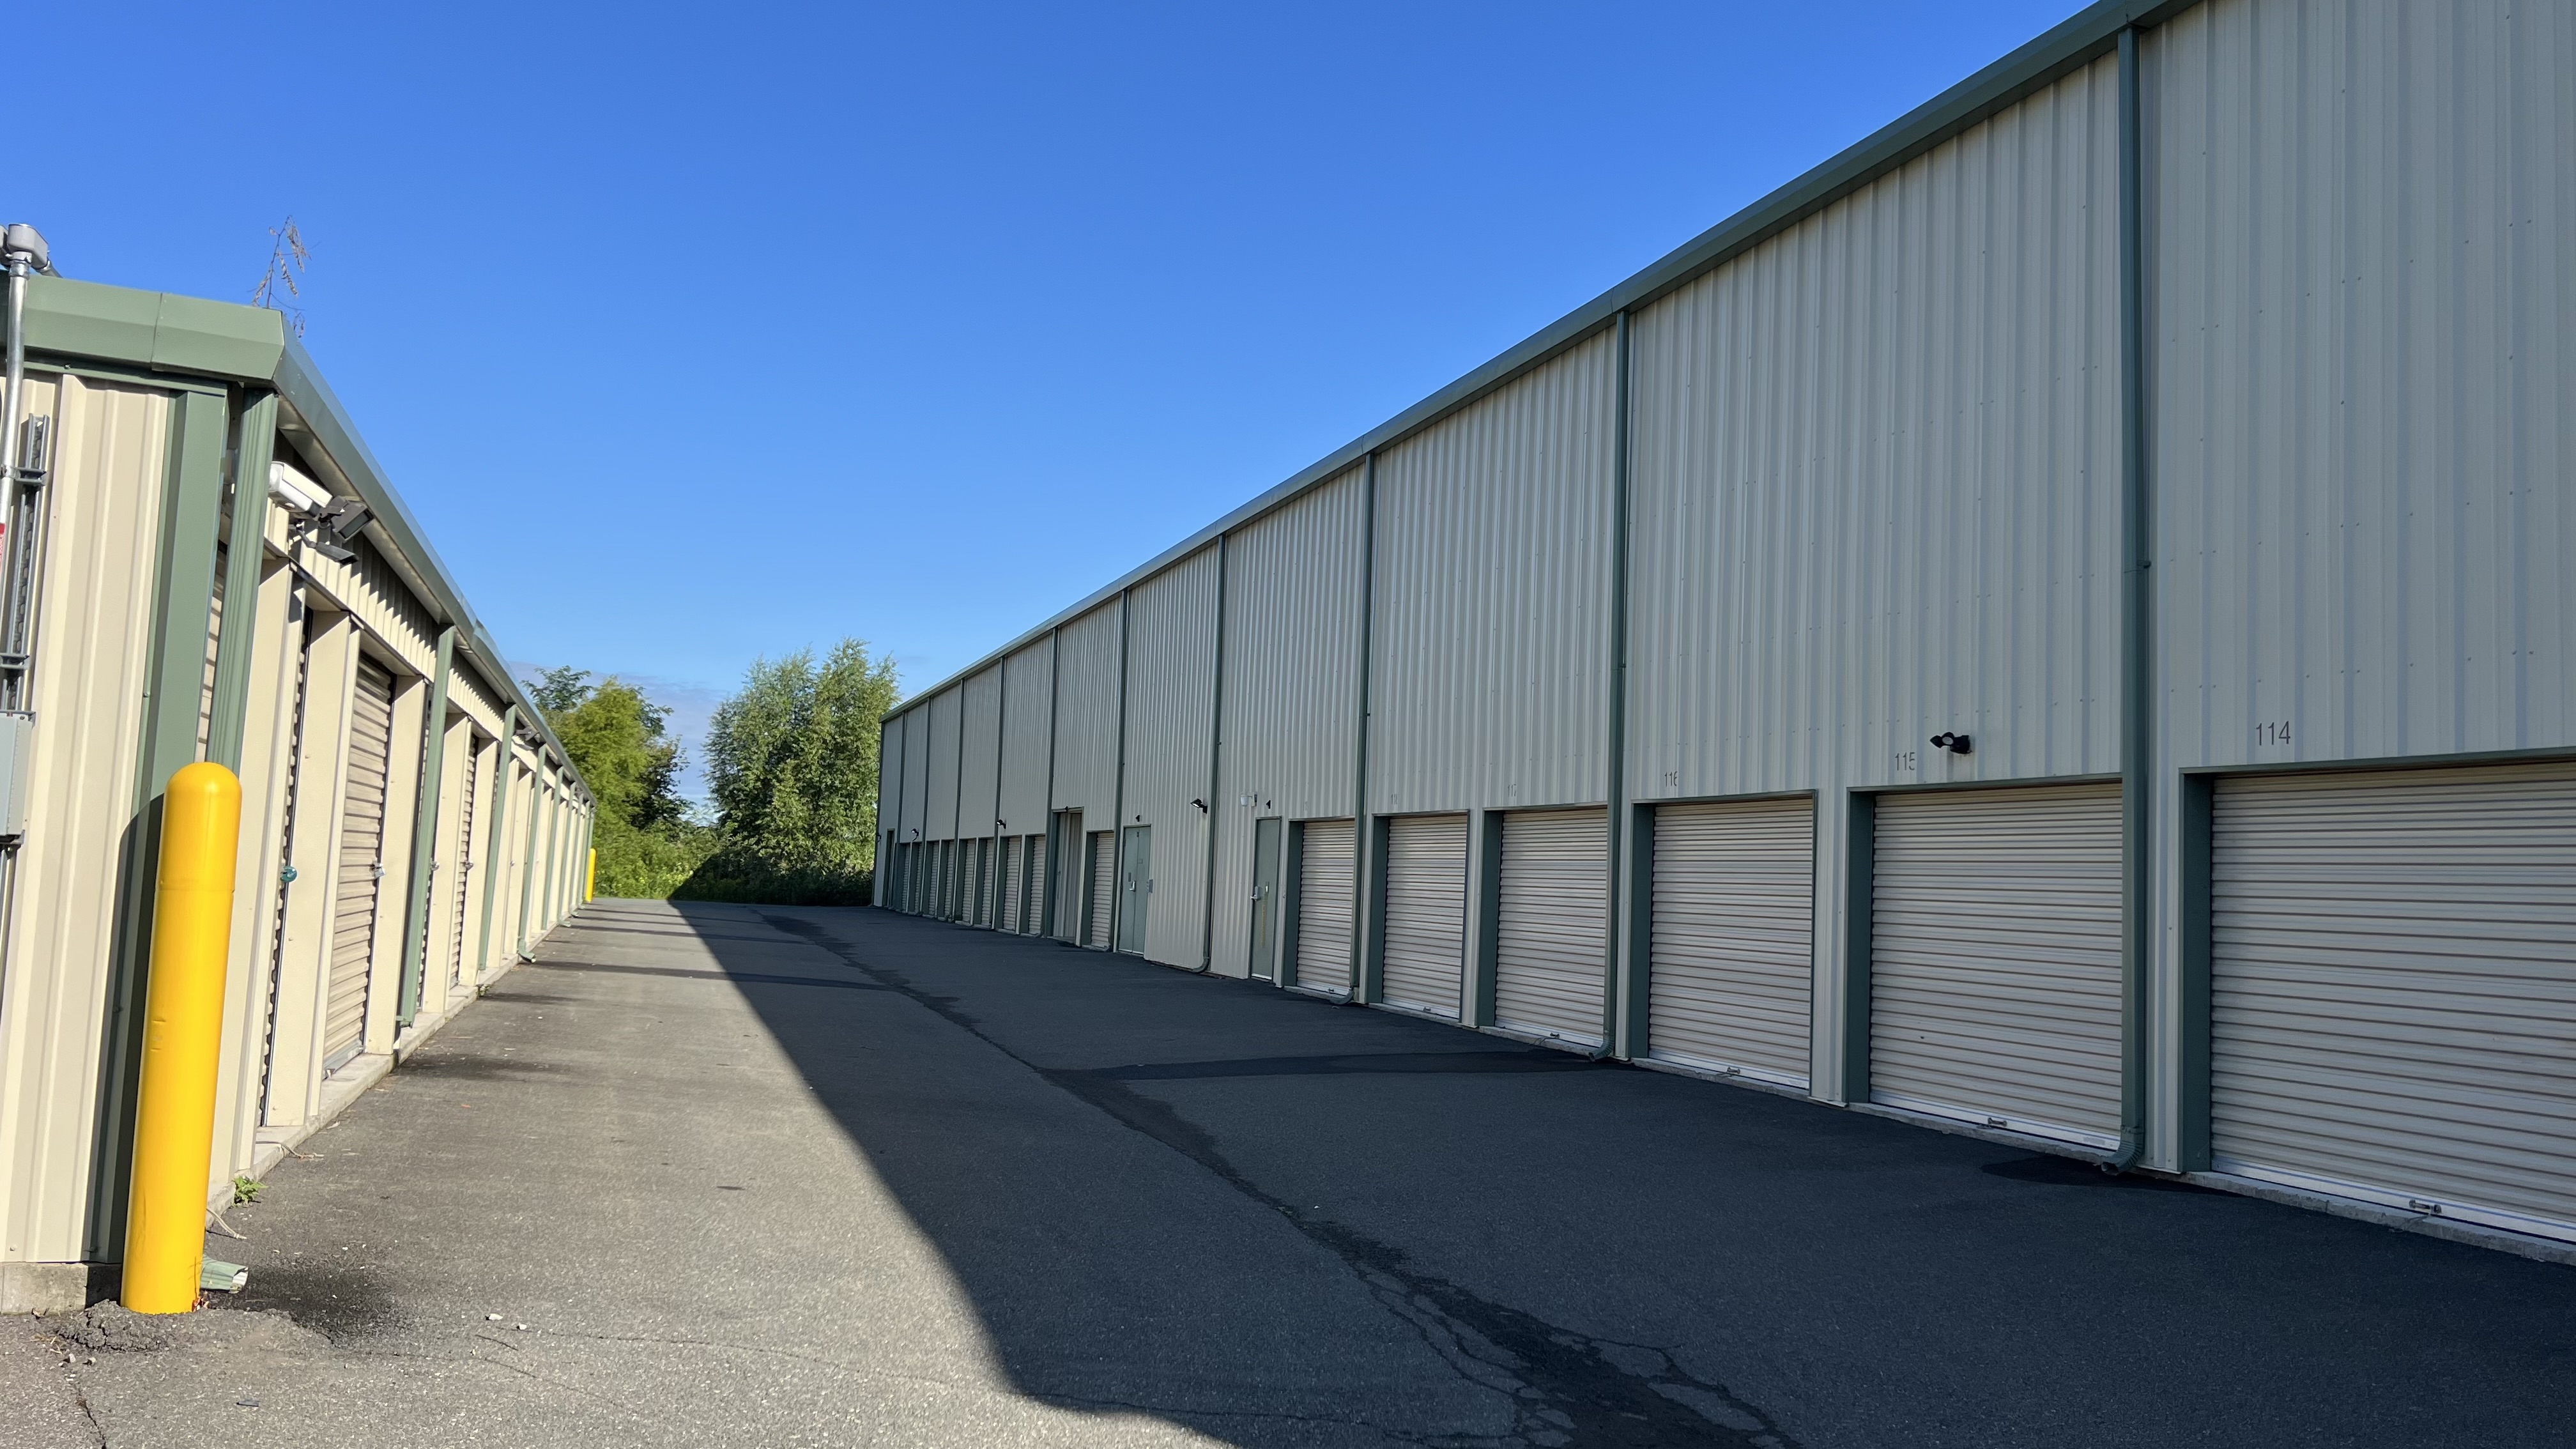 Storage Units for Latham and Colonie